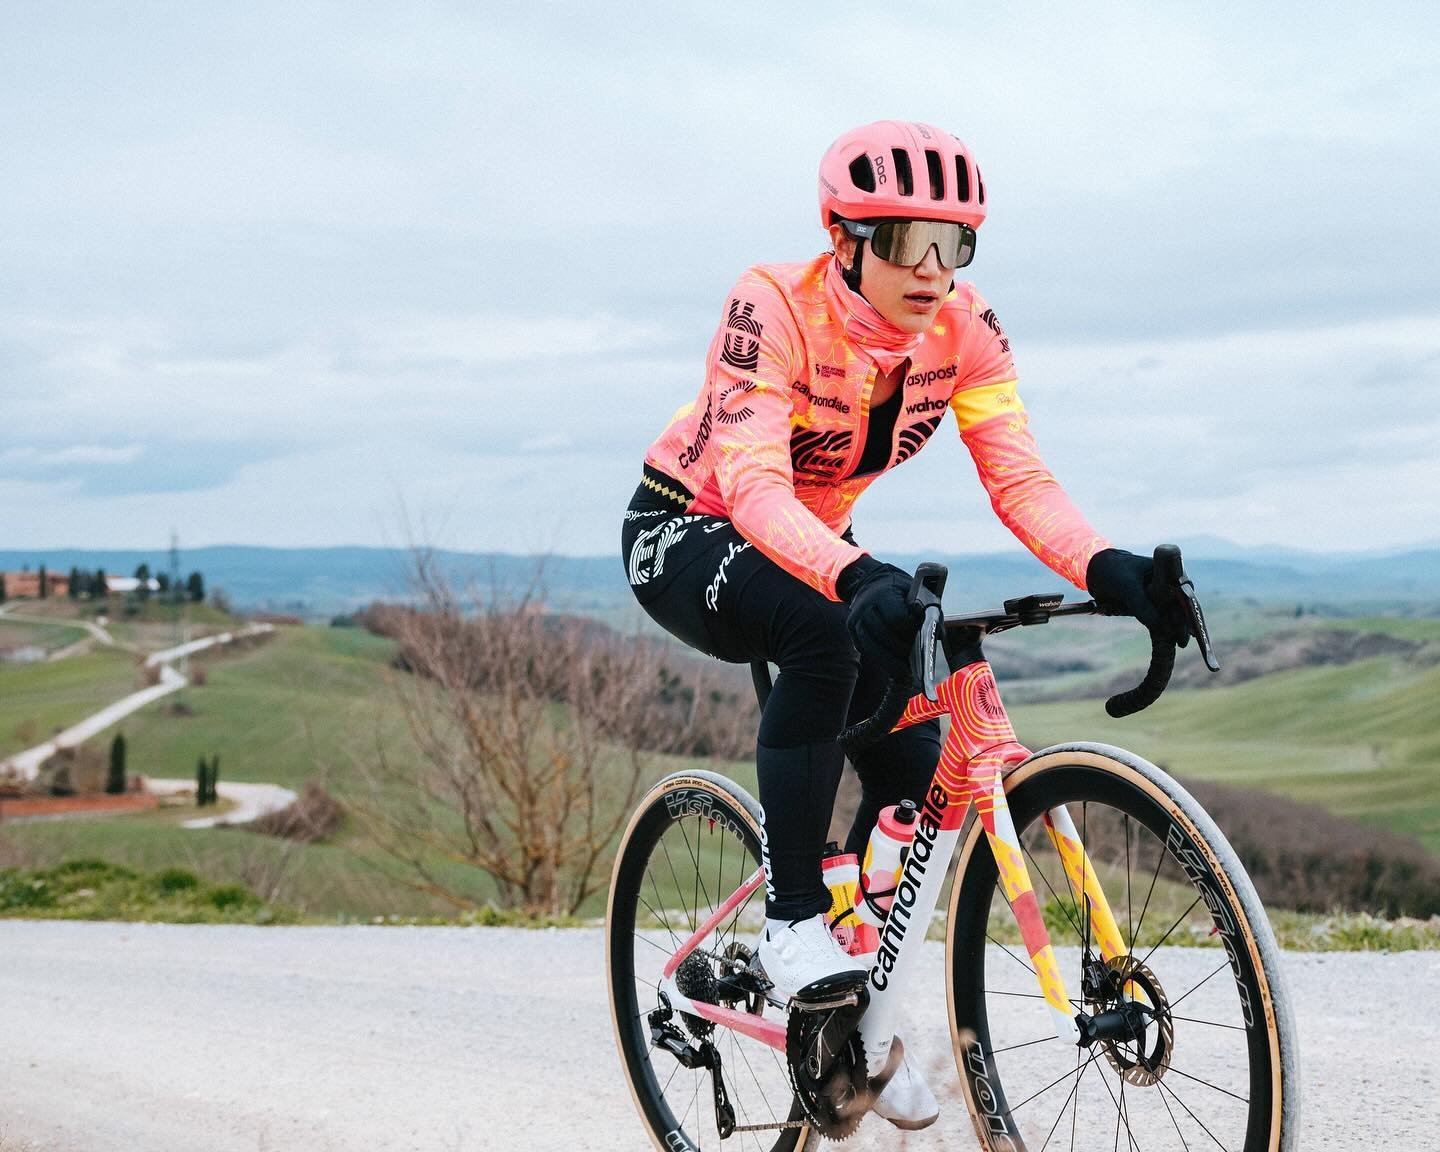 On Saturday 9:35 CET, we tackle Strade Bianche on the steep white gravel roads that lead to Siena. There will be live 📺 coverage! With breathtaking landscapes, rustic villages, and the allure of Italian pasta, Tuscany is perhaps my favorite place to